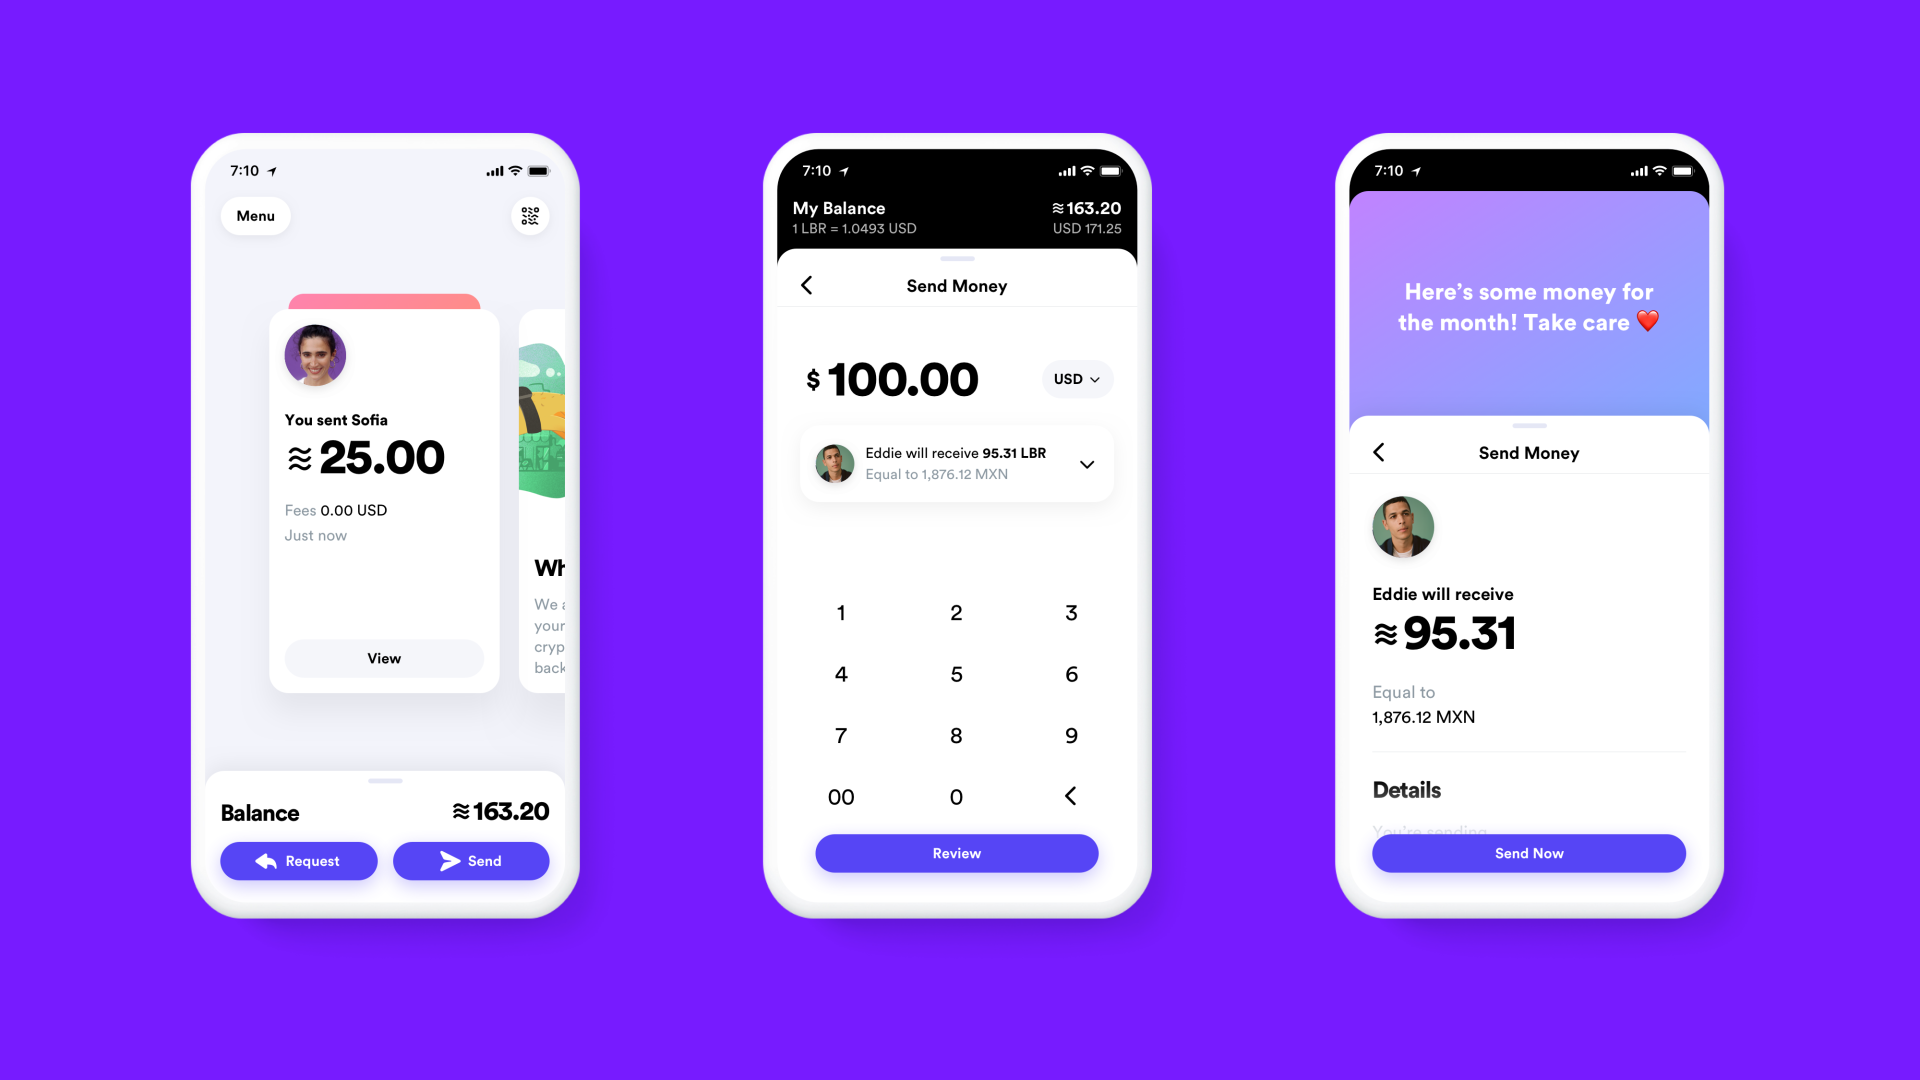 Facebook says it will offer services such as paying bills and taking public transit with its Calibra wallet. (Picture: Facebook)